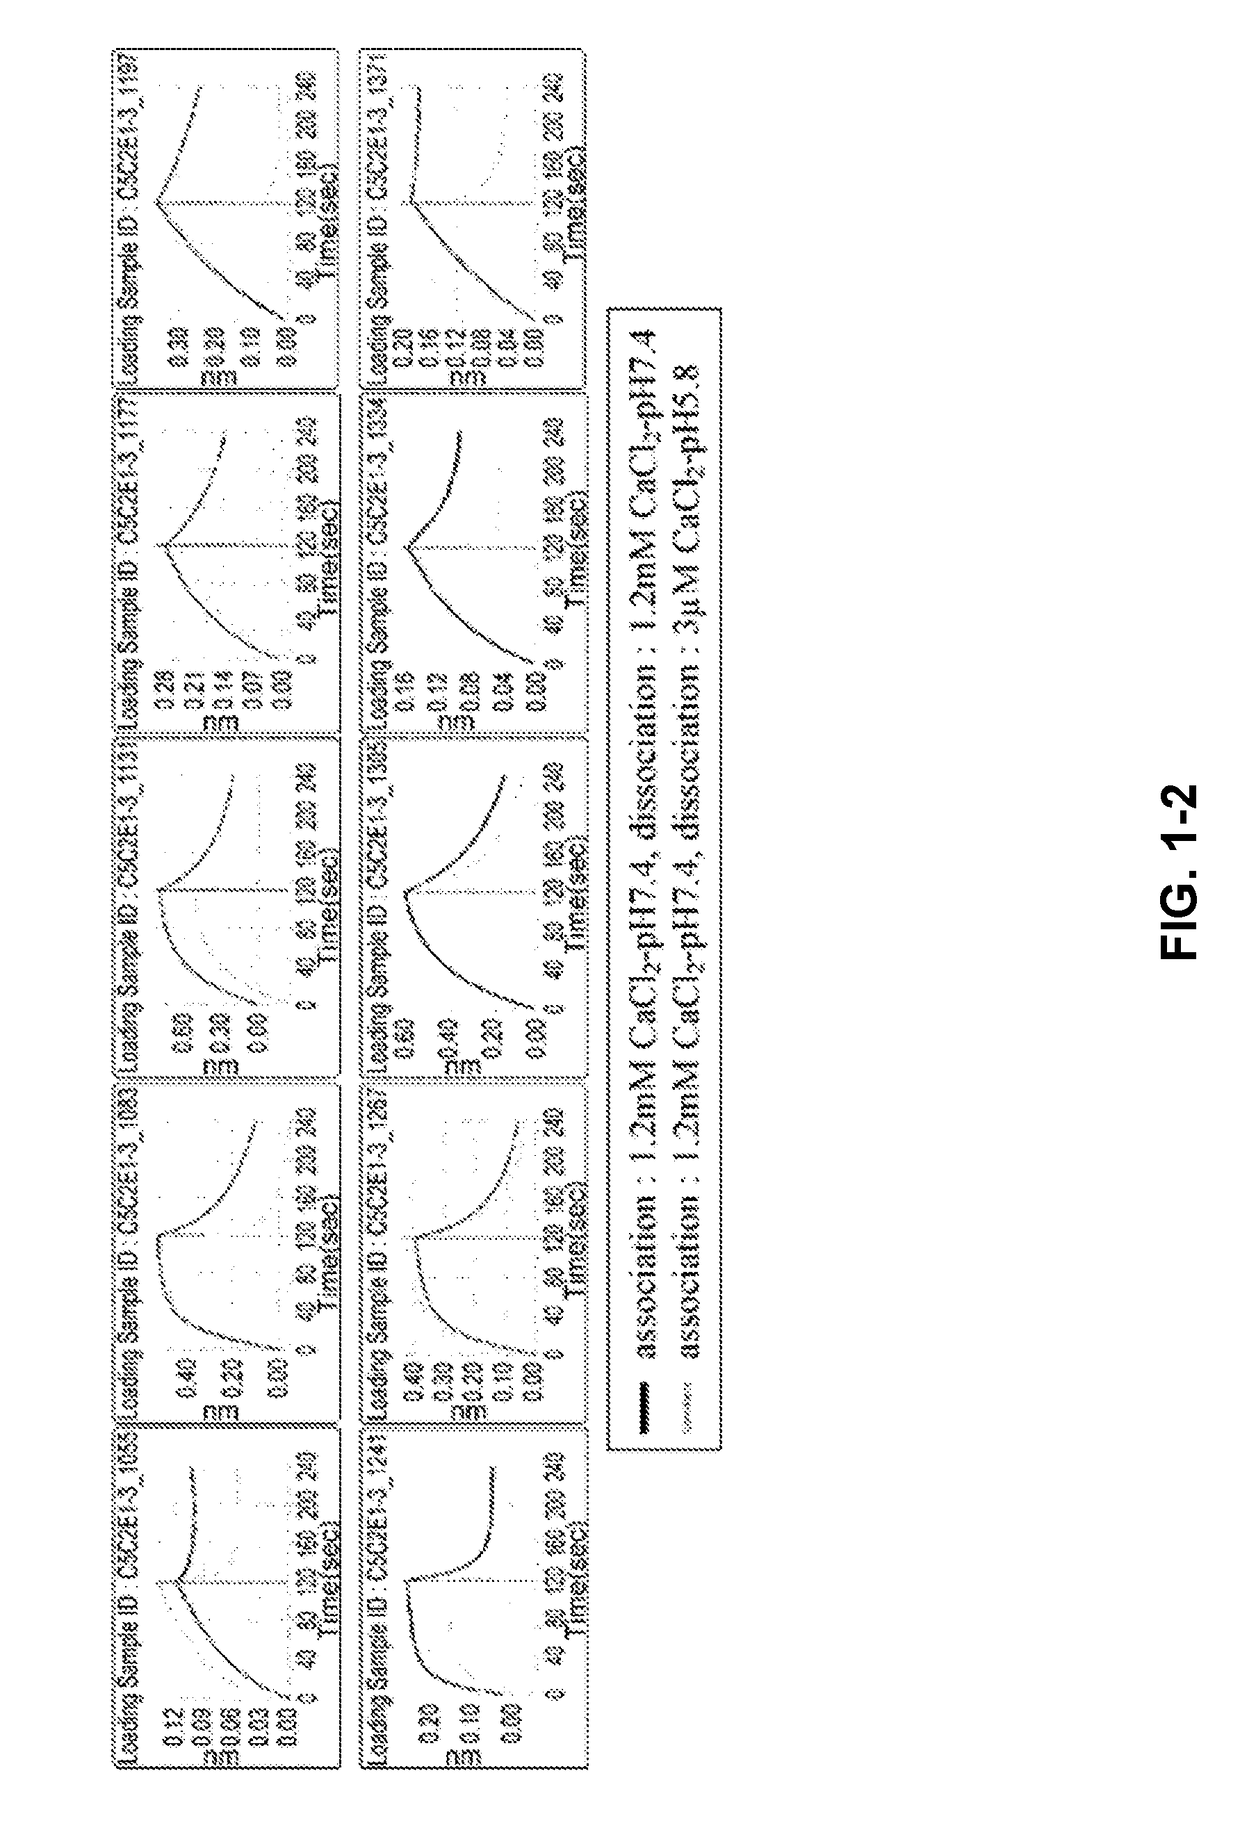 A Combination of Two or More Anti-C5 Antibodies and Methods of Use